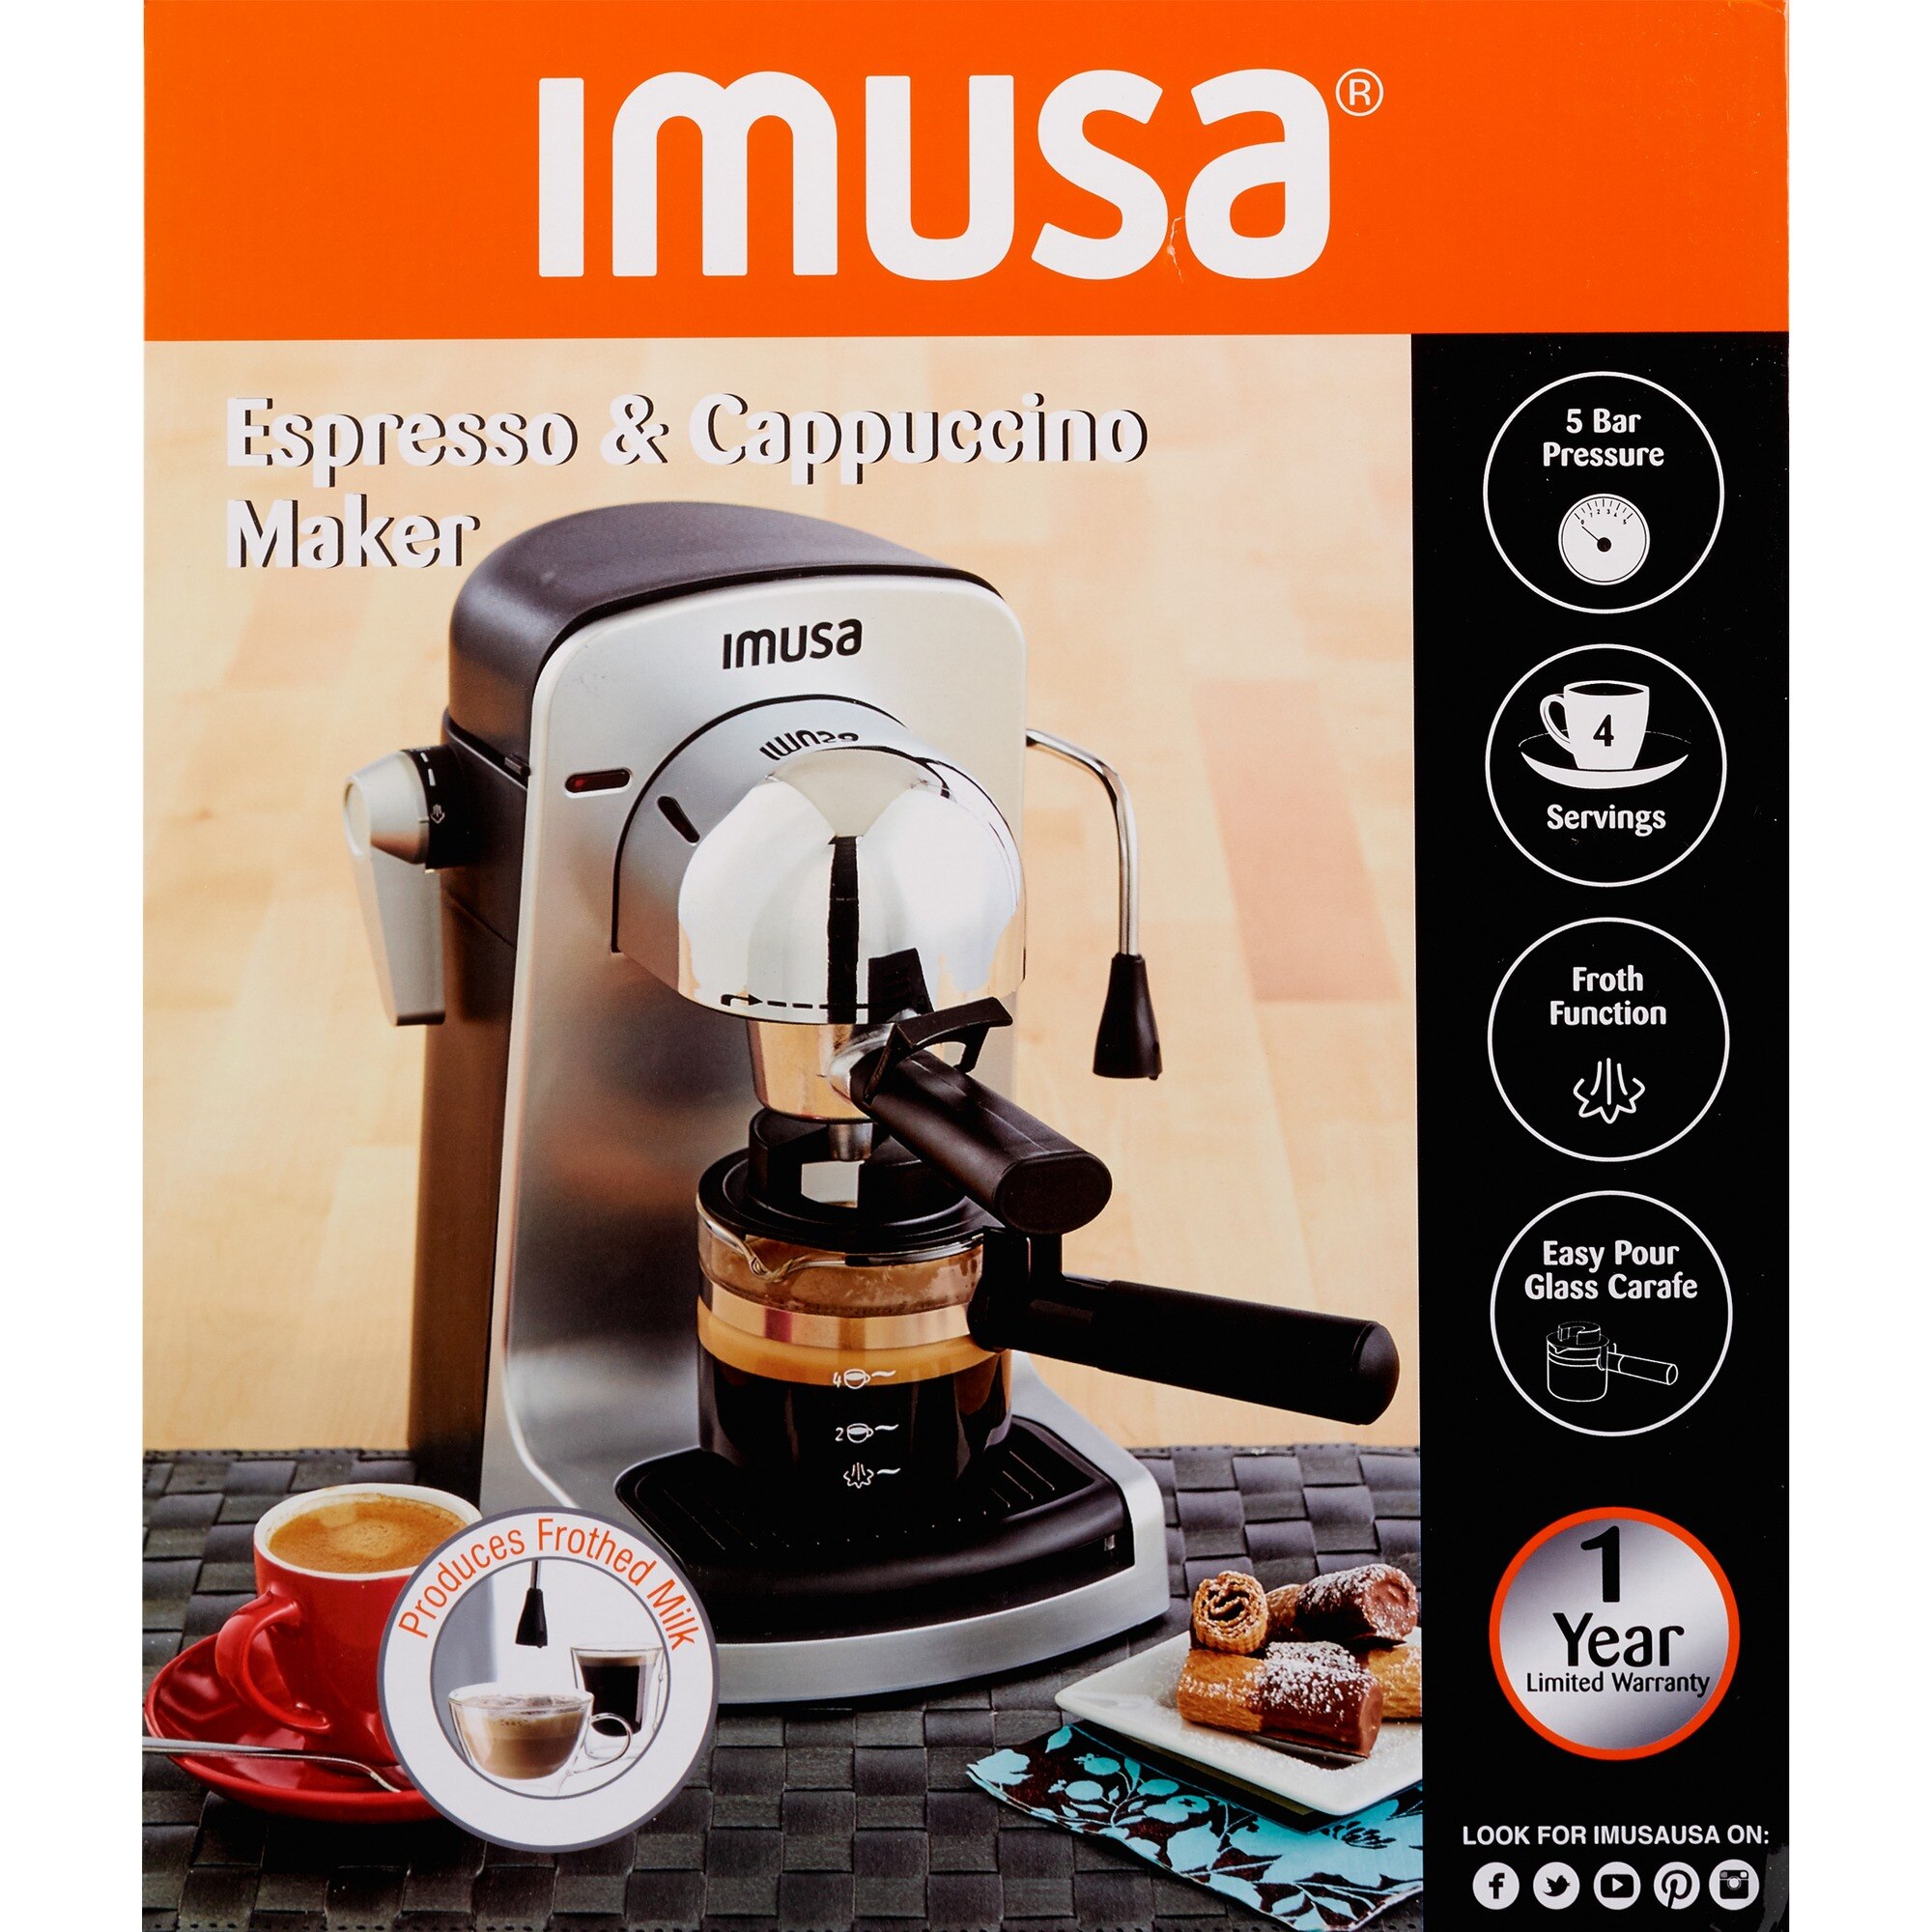 IMUSA 4 Cup Stainless Steel Espresso Coffee Maker